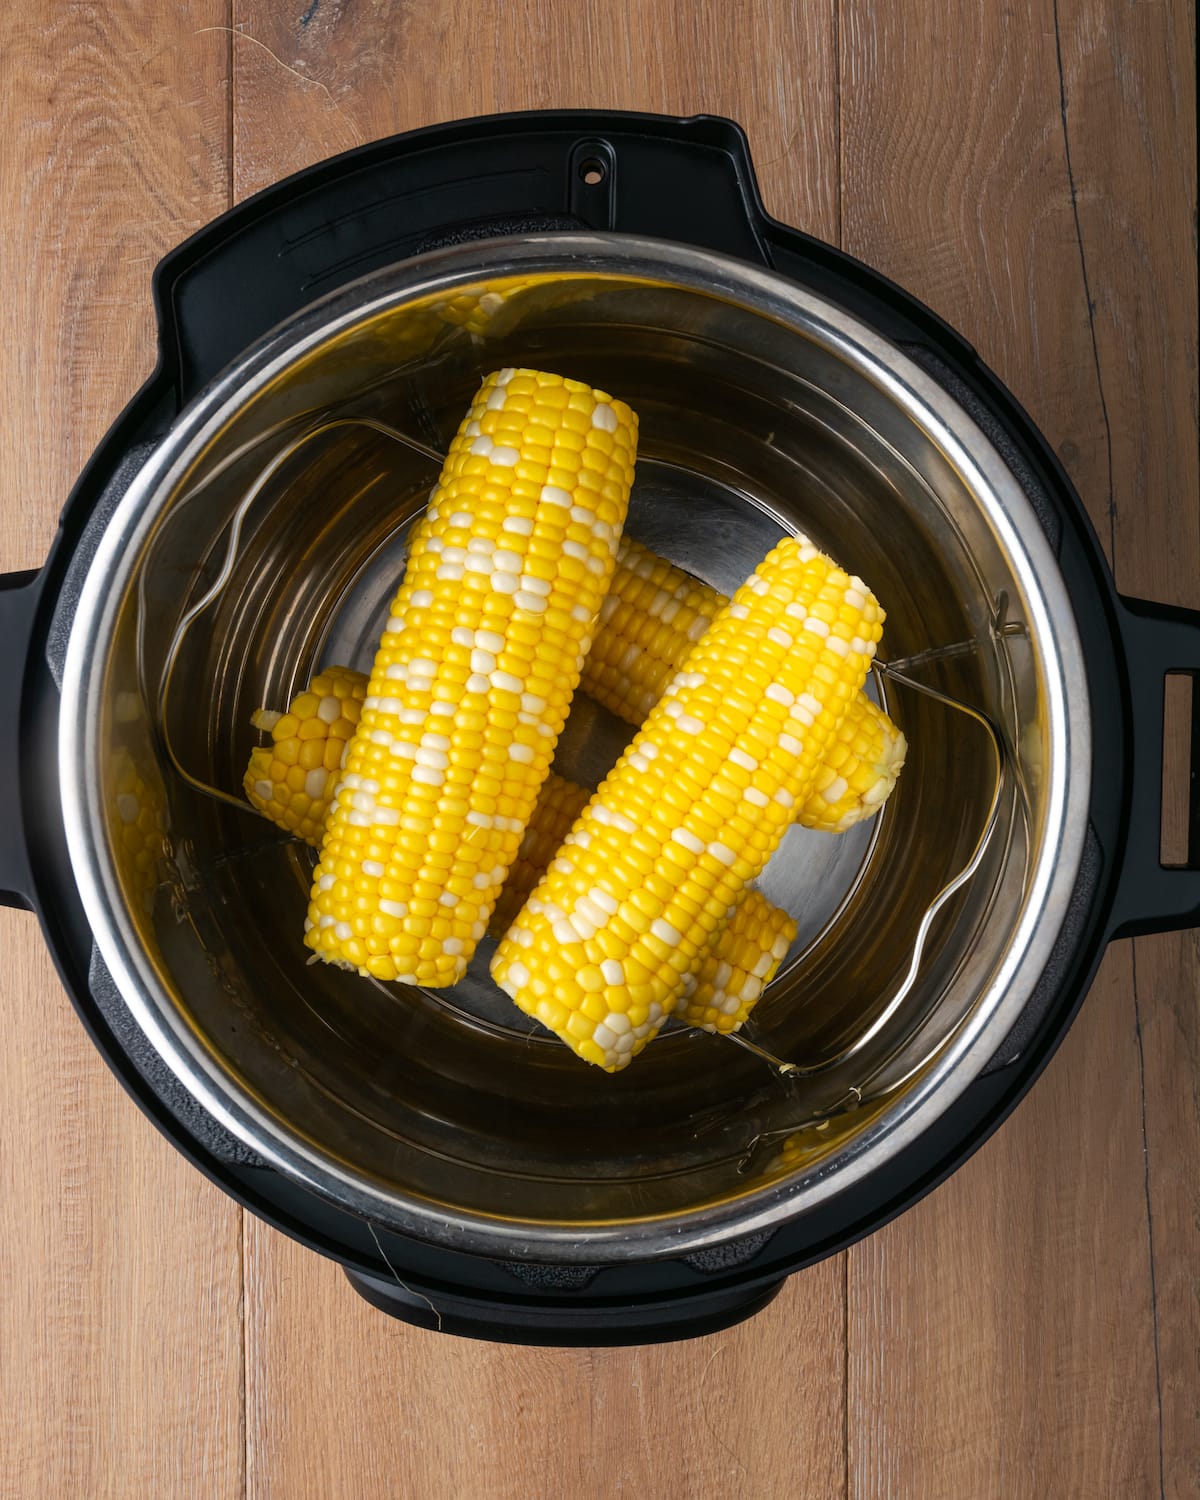 Top view of shucked ears of corn inside an Instant Pot.